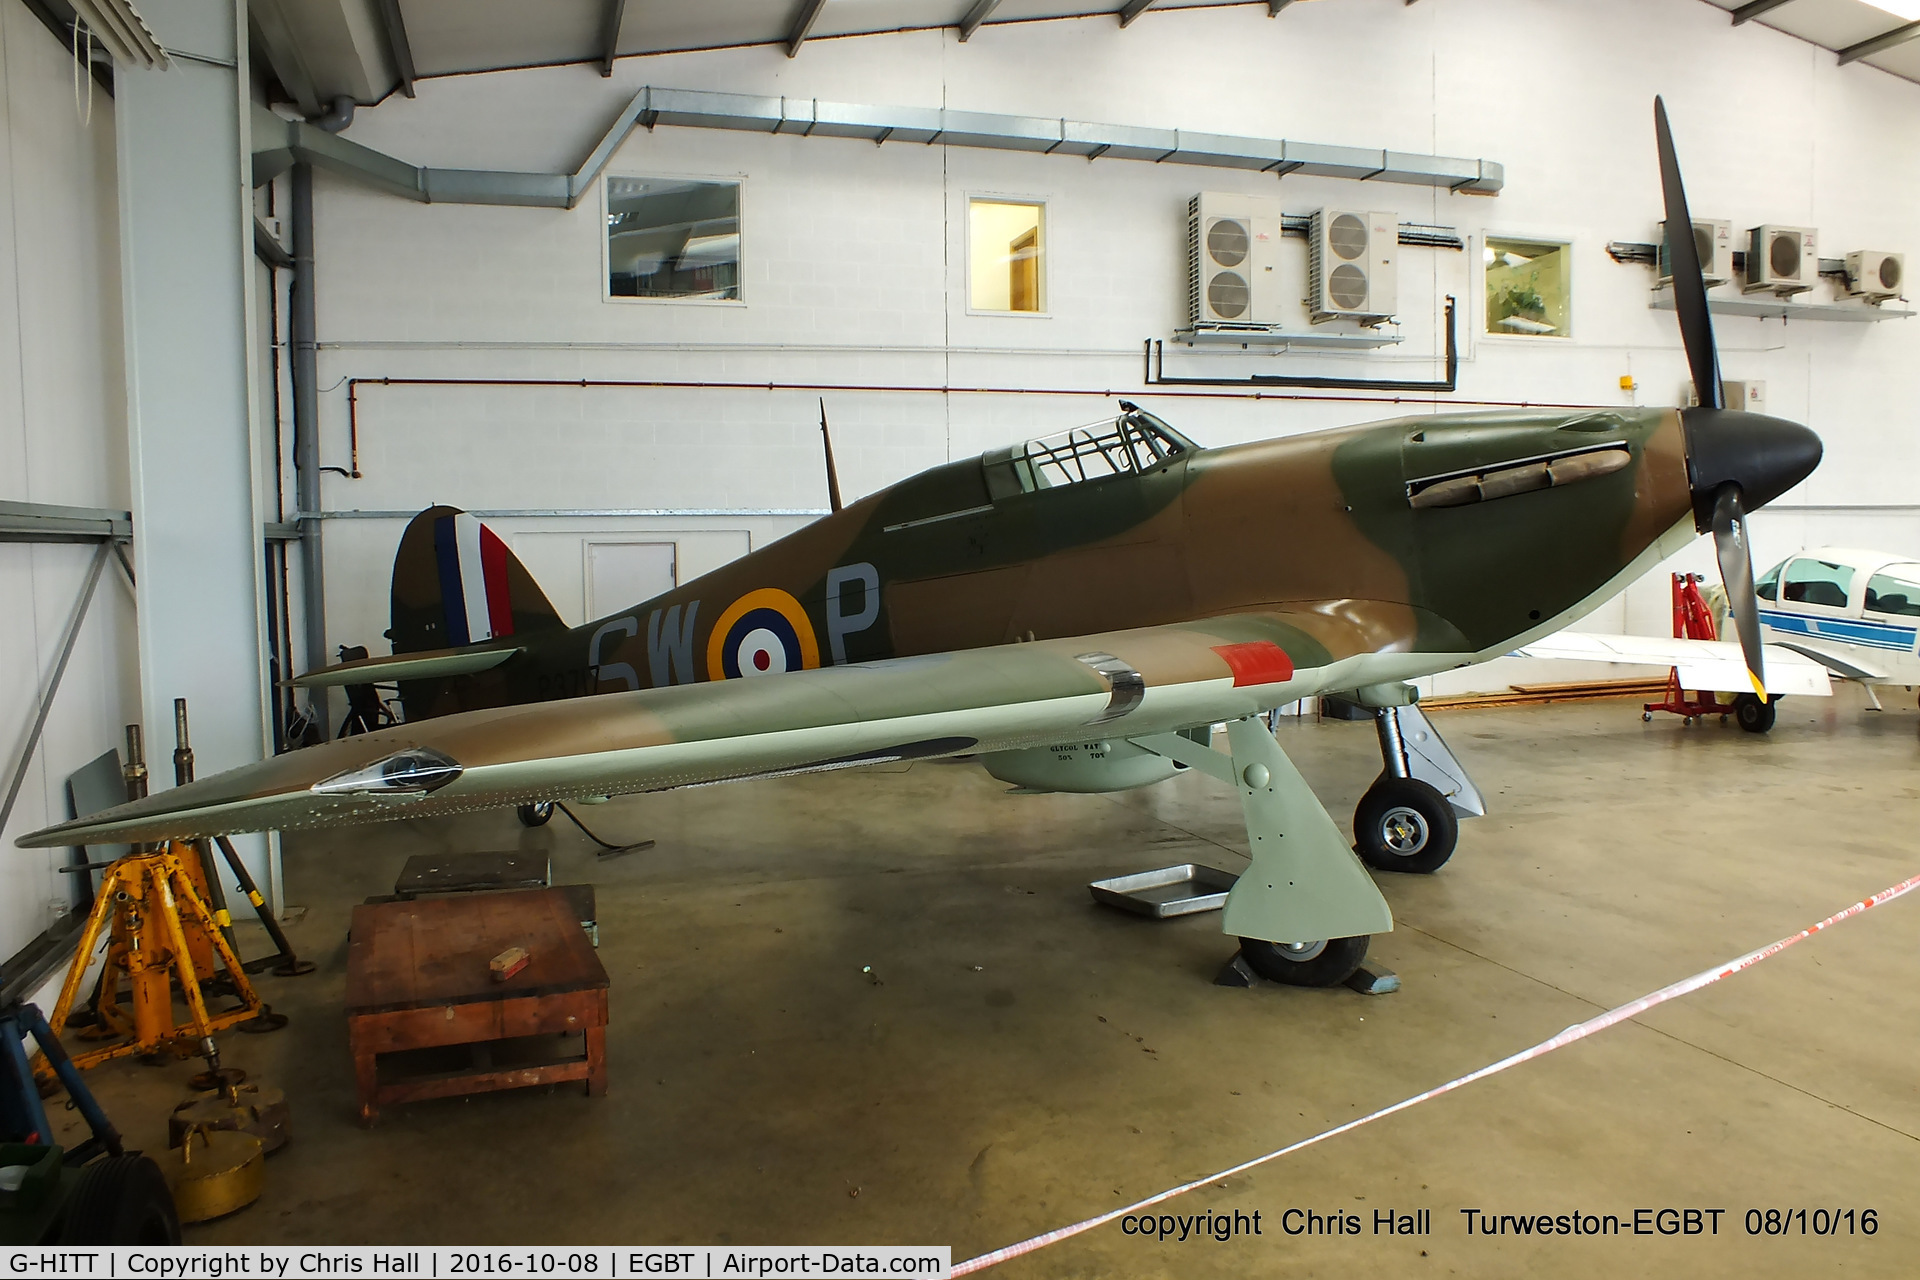 G-HITT, 1940 Hawker Hurricane I C/N Not found / see comment, at Turweston